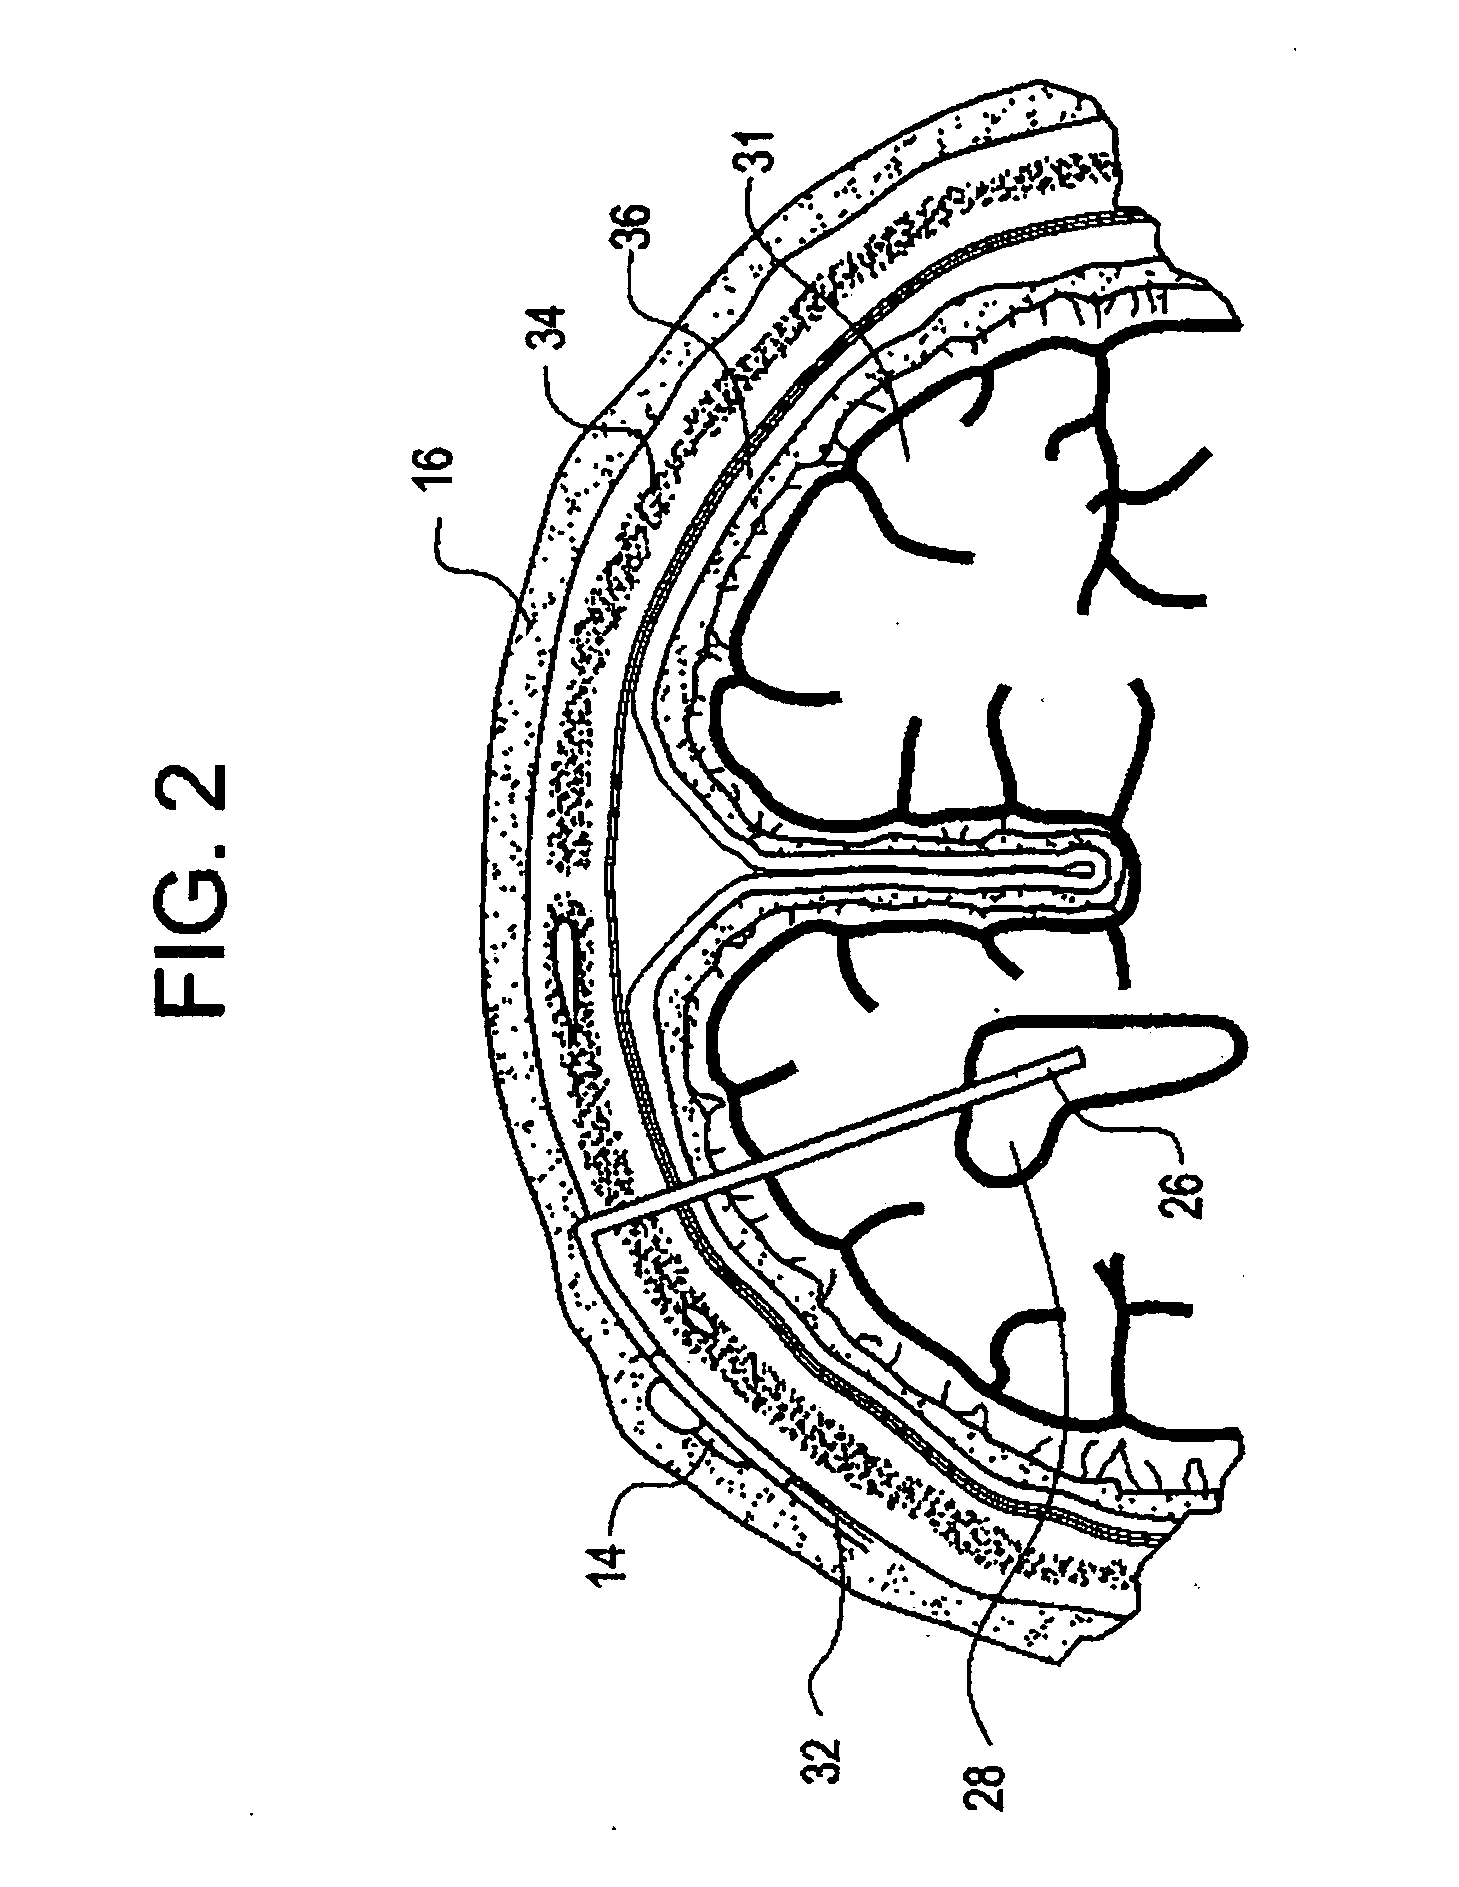 System for transcutaneous monitoring of intracranial pressure